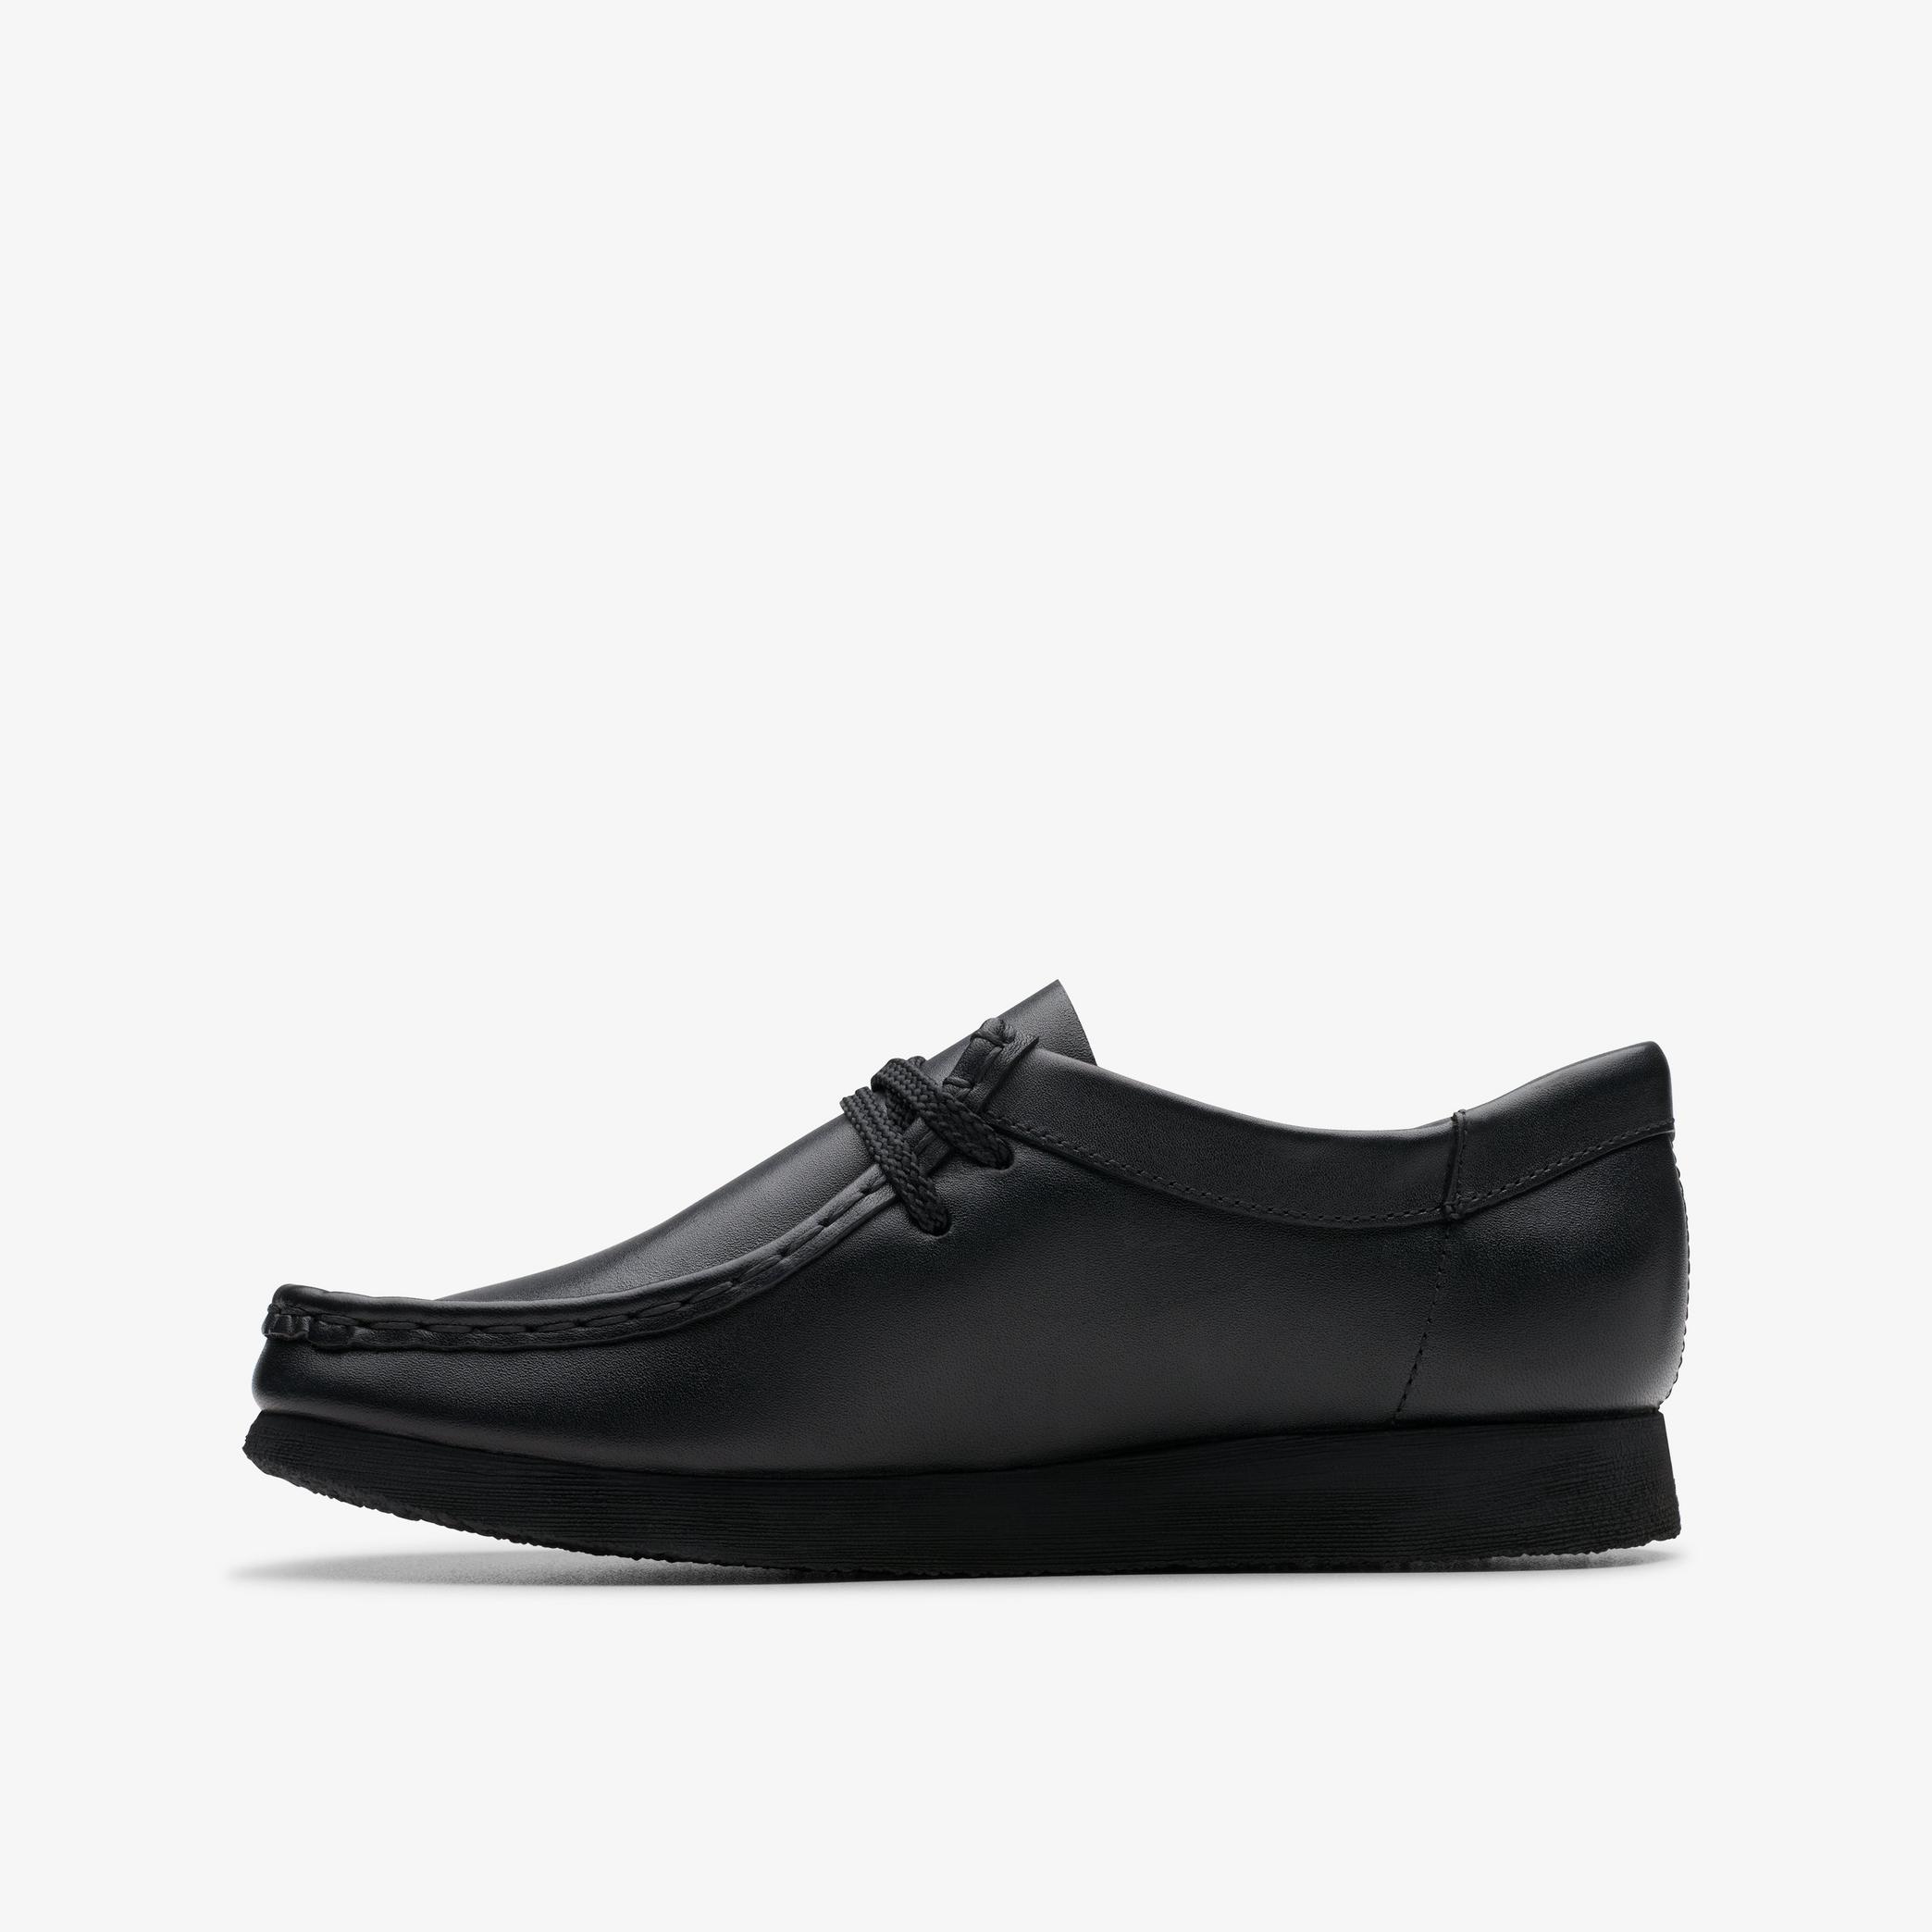 BOYS Wallabee Older Black Leather Shoes | Clarks US